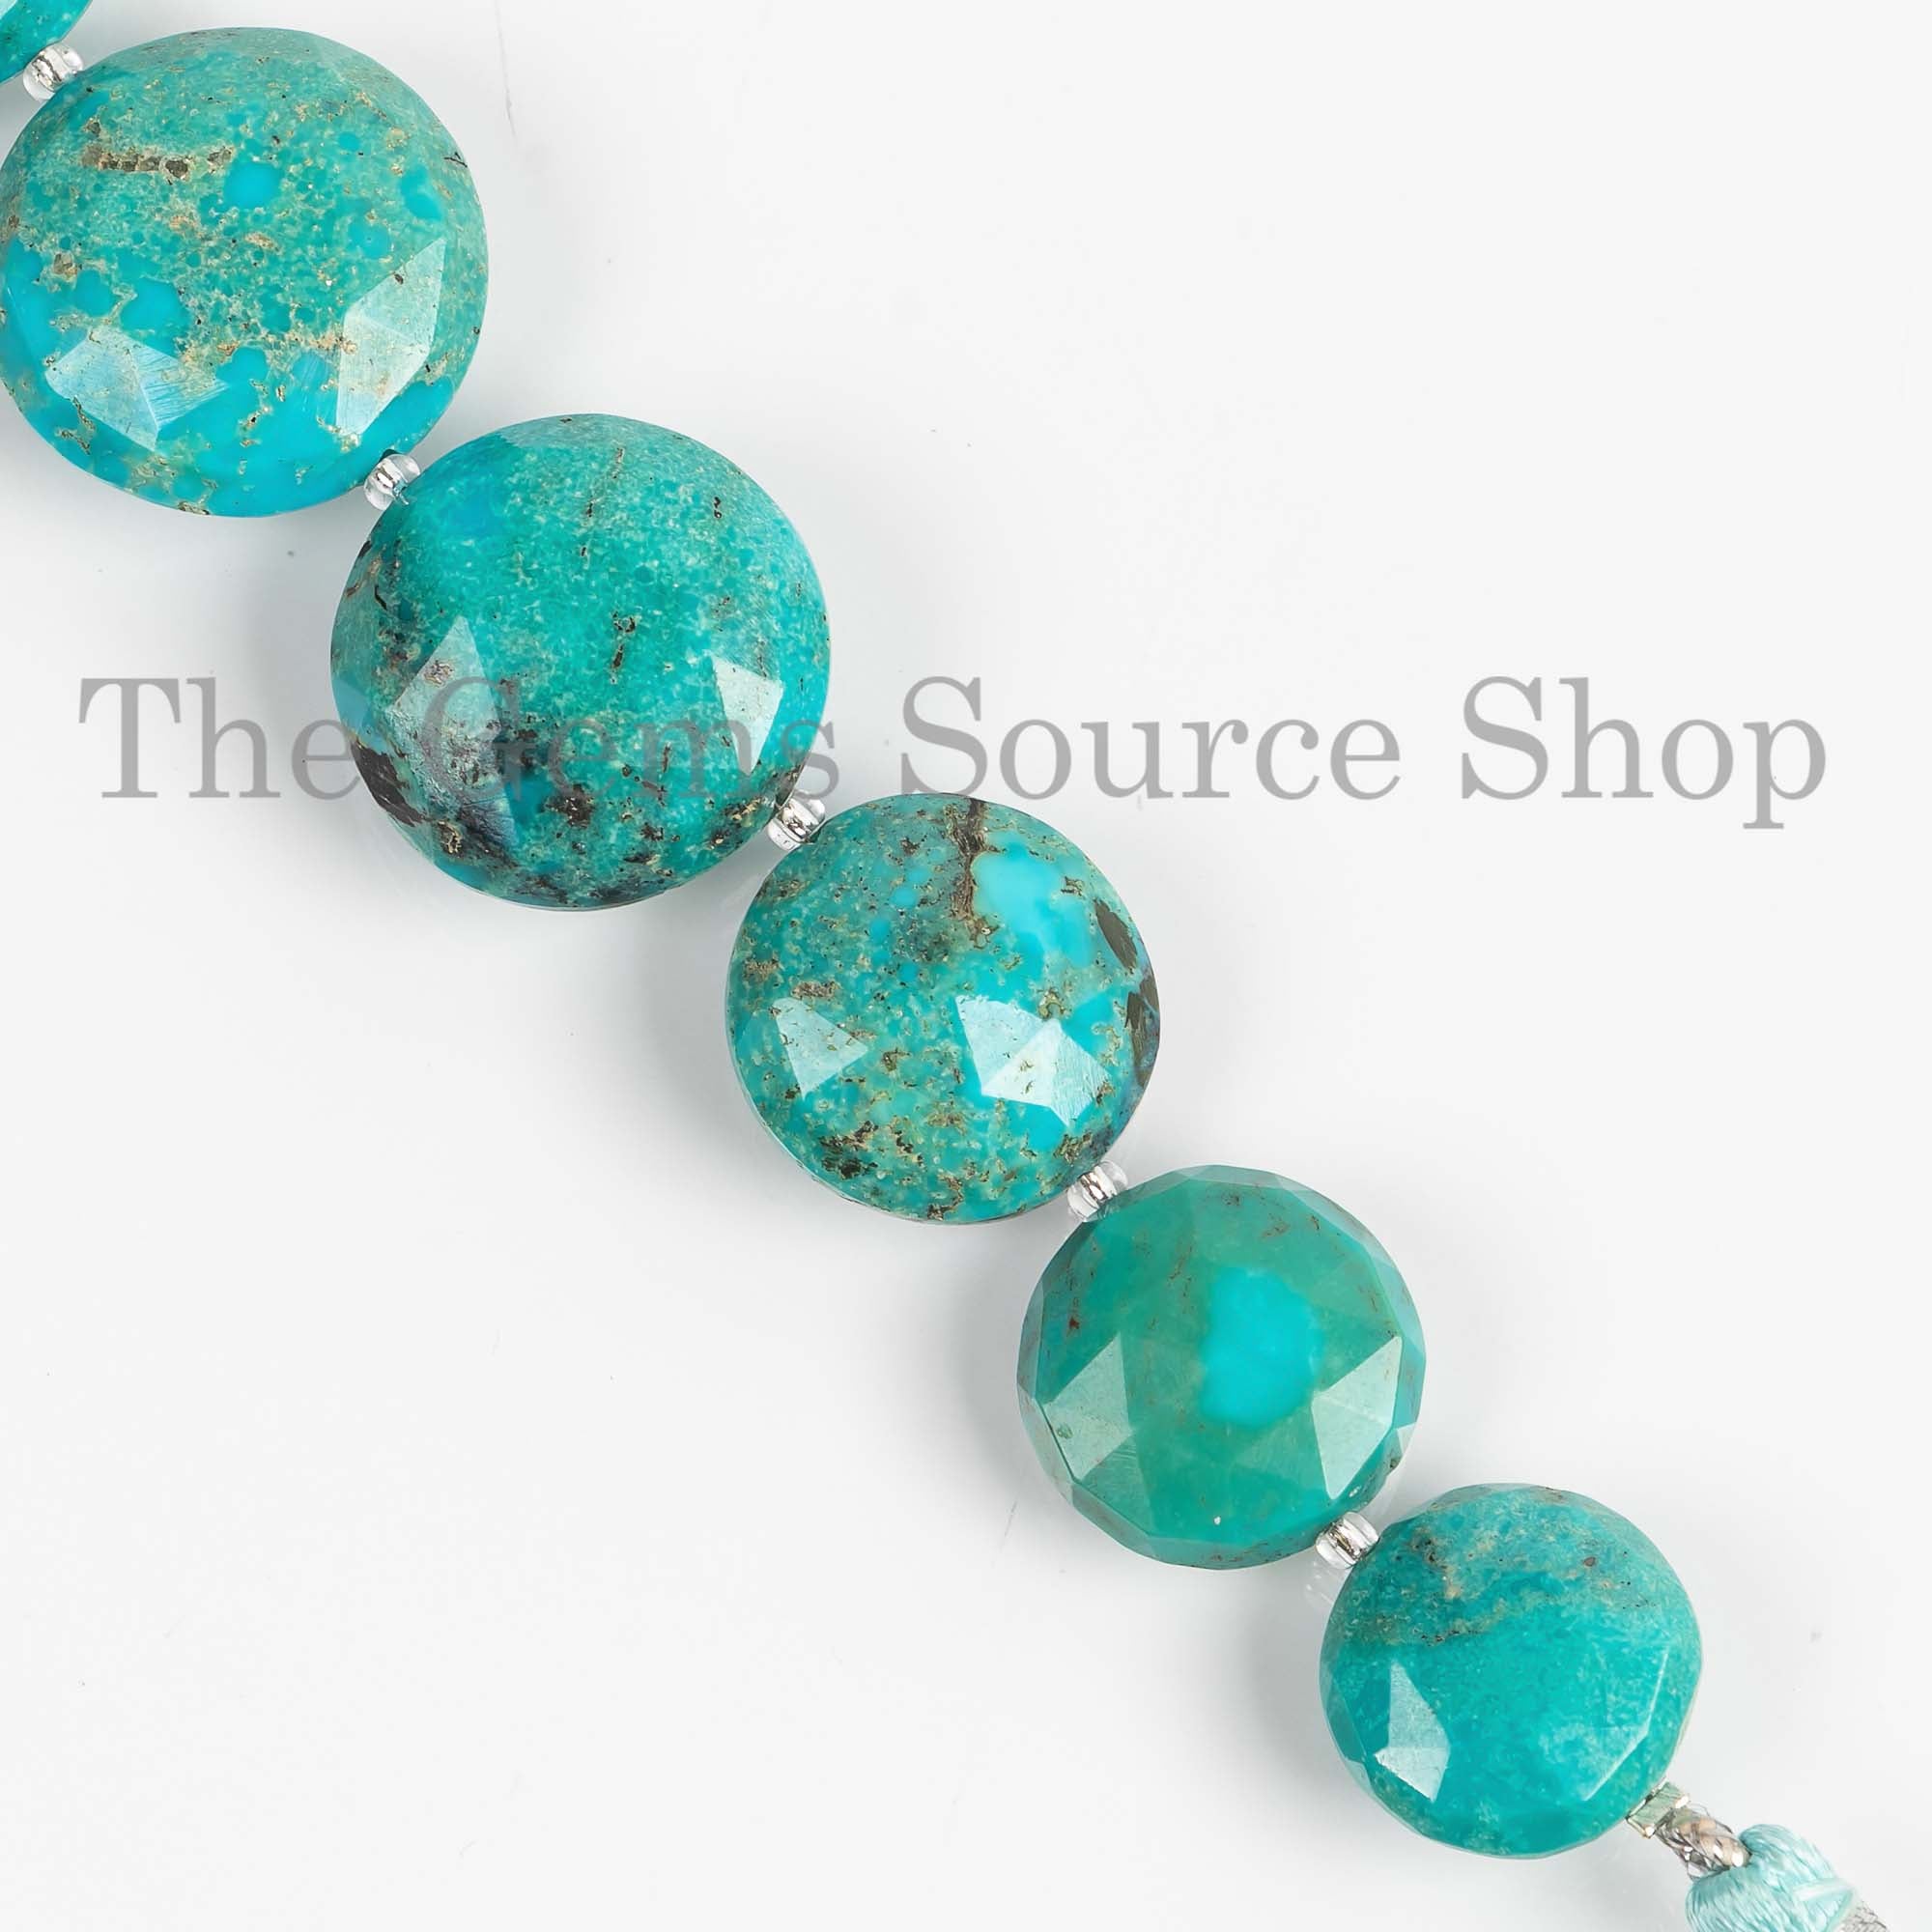 Arizona Turquoise Coin Briolette, 15-21mm Turquoise Round Coin Beads, Turquoise Faceted Beads, Coin Beads, Wholesale Beads Jewelry